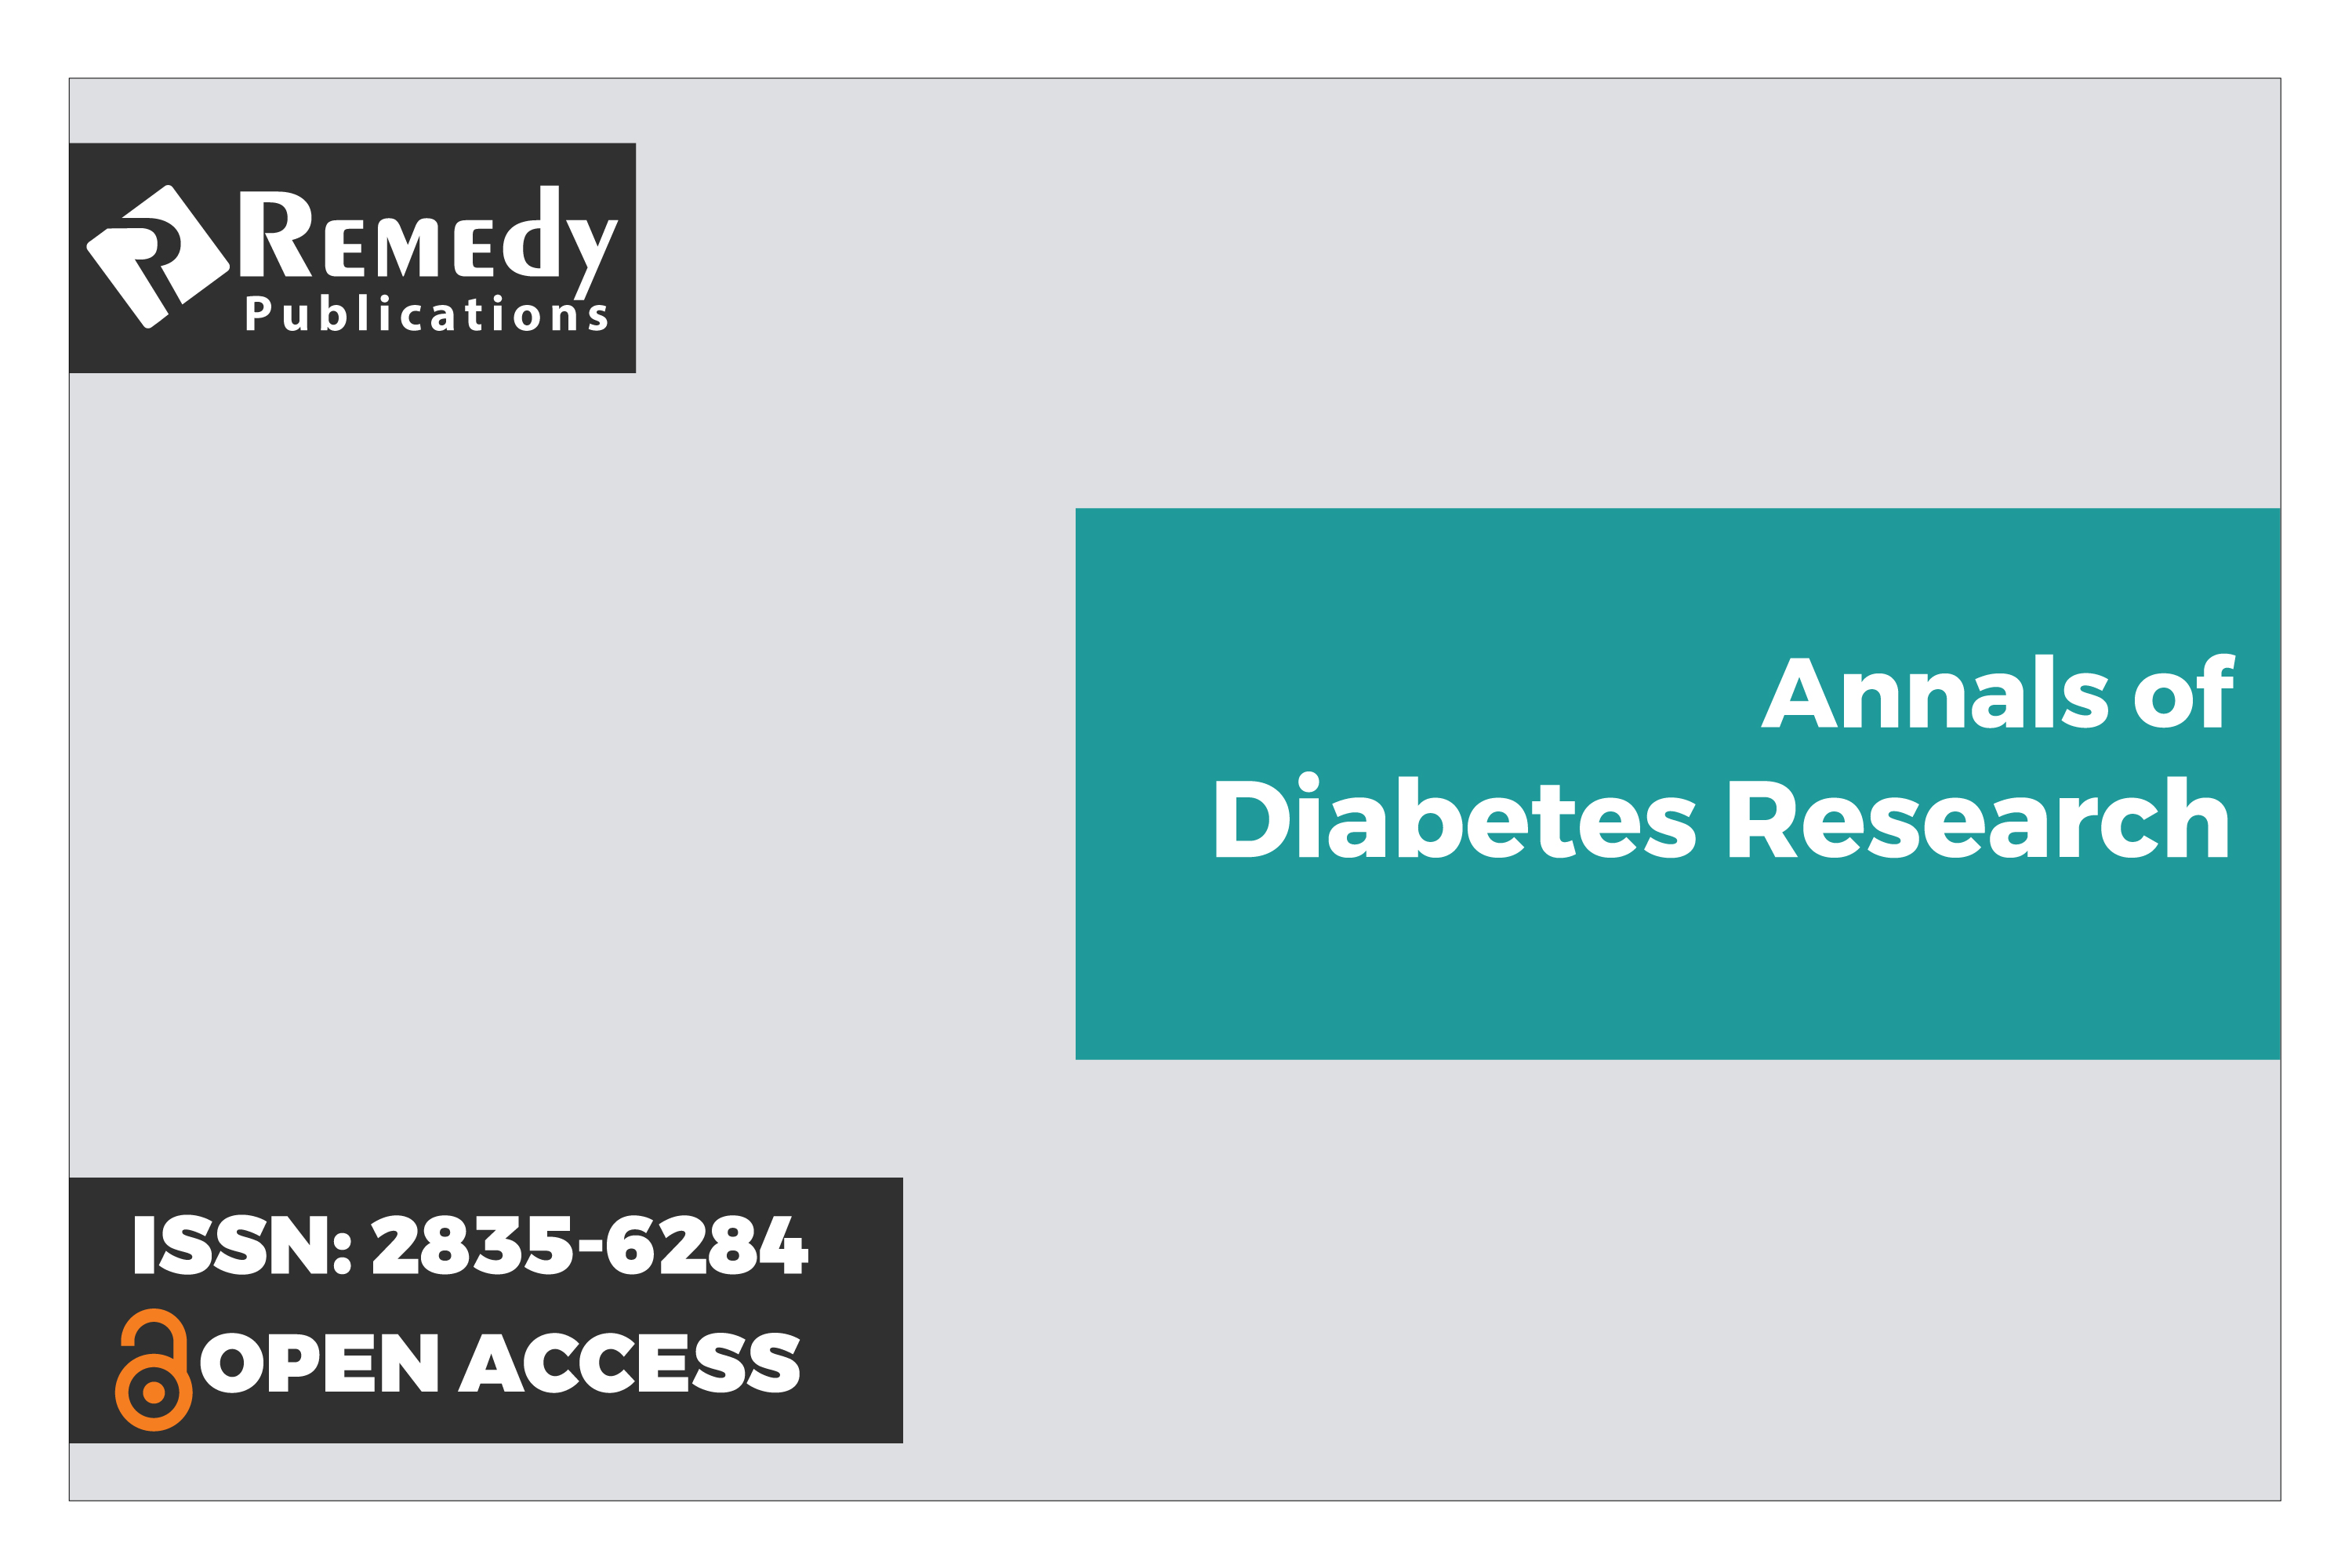 Annals of Diabetes Research